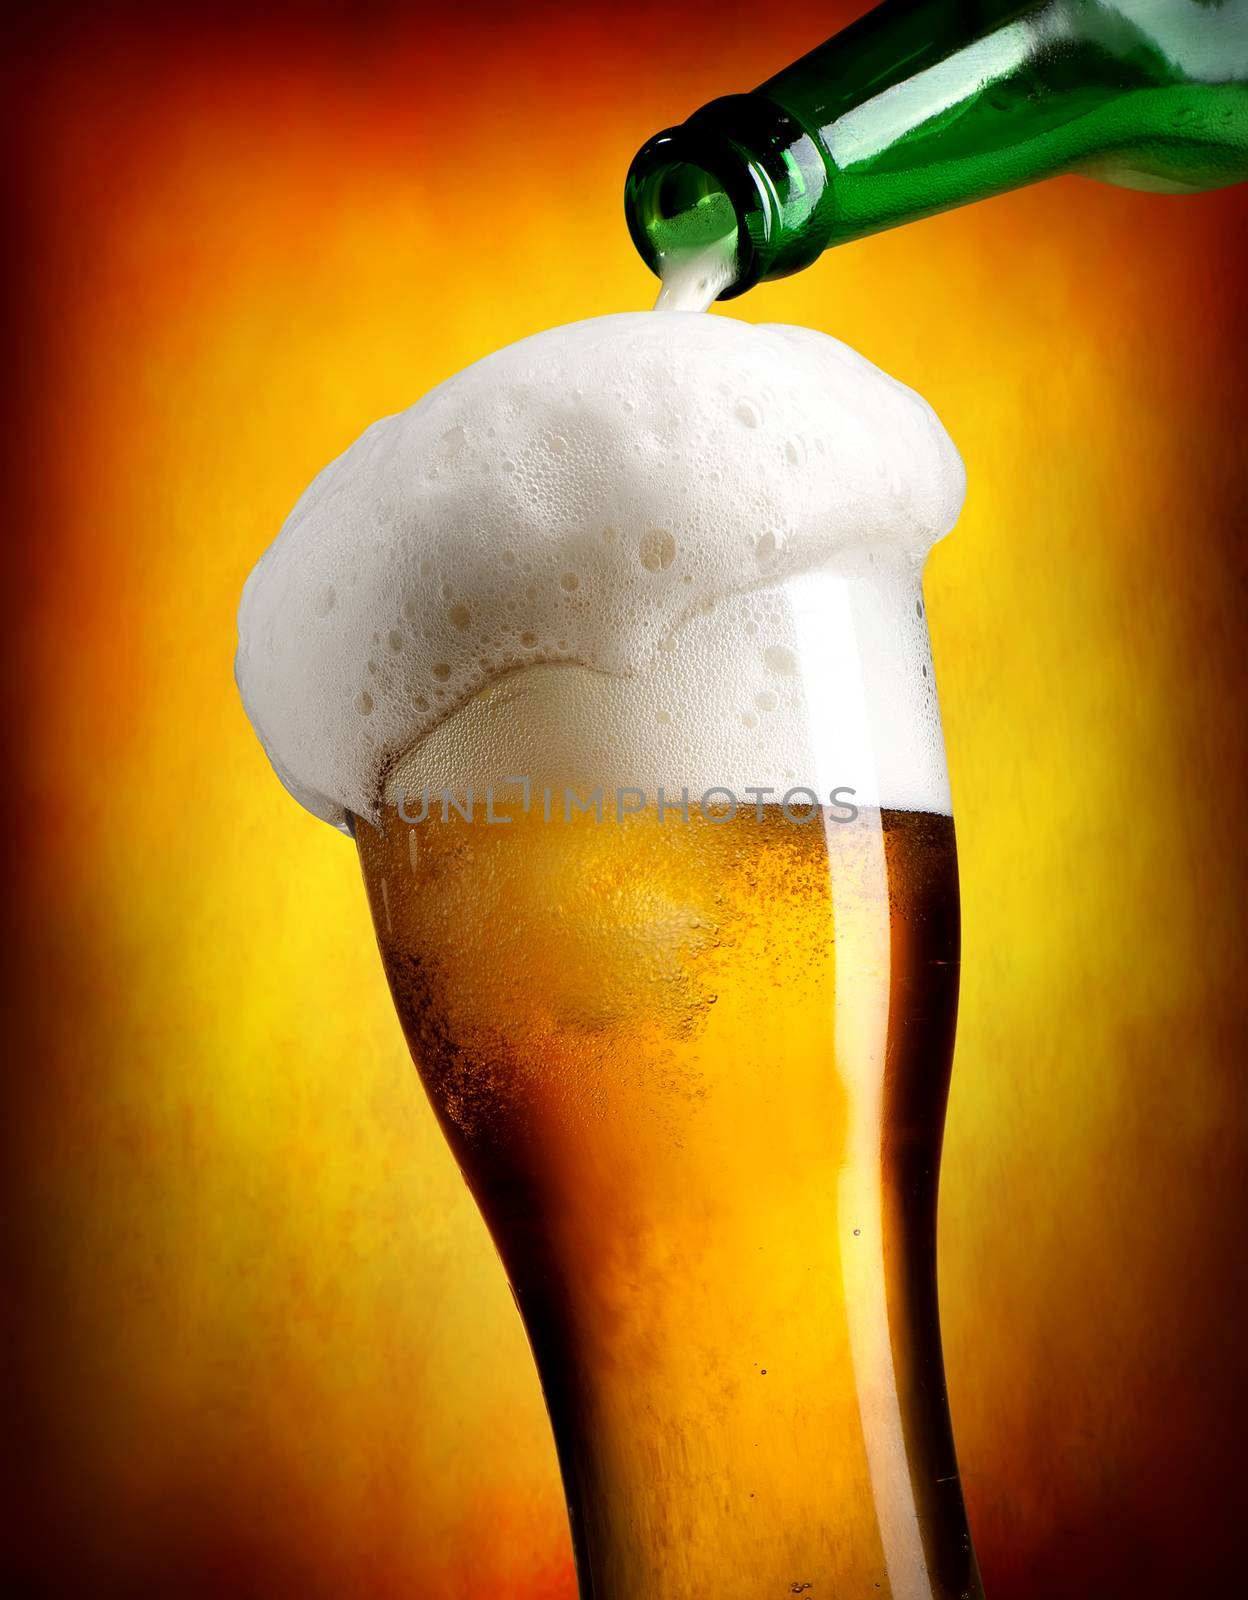 Beer pouring from bottle in tumbler on orange background